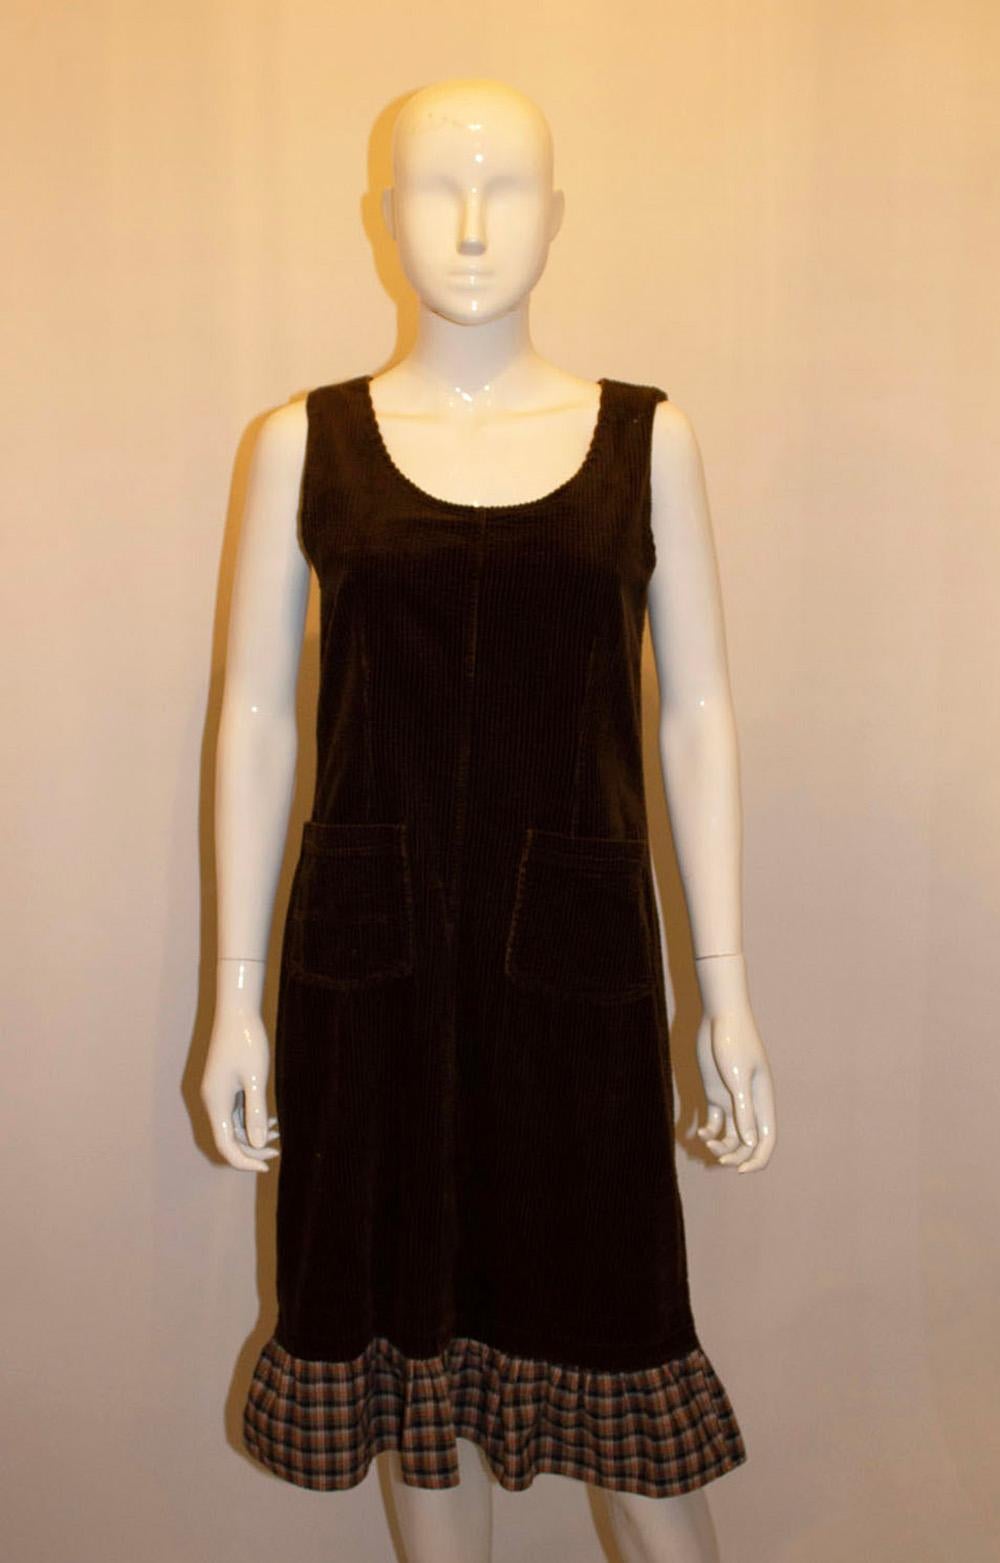 Vintage Monsoon Pinafore Dress with Check Frill In Good Condition For Sale In London, GB